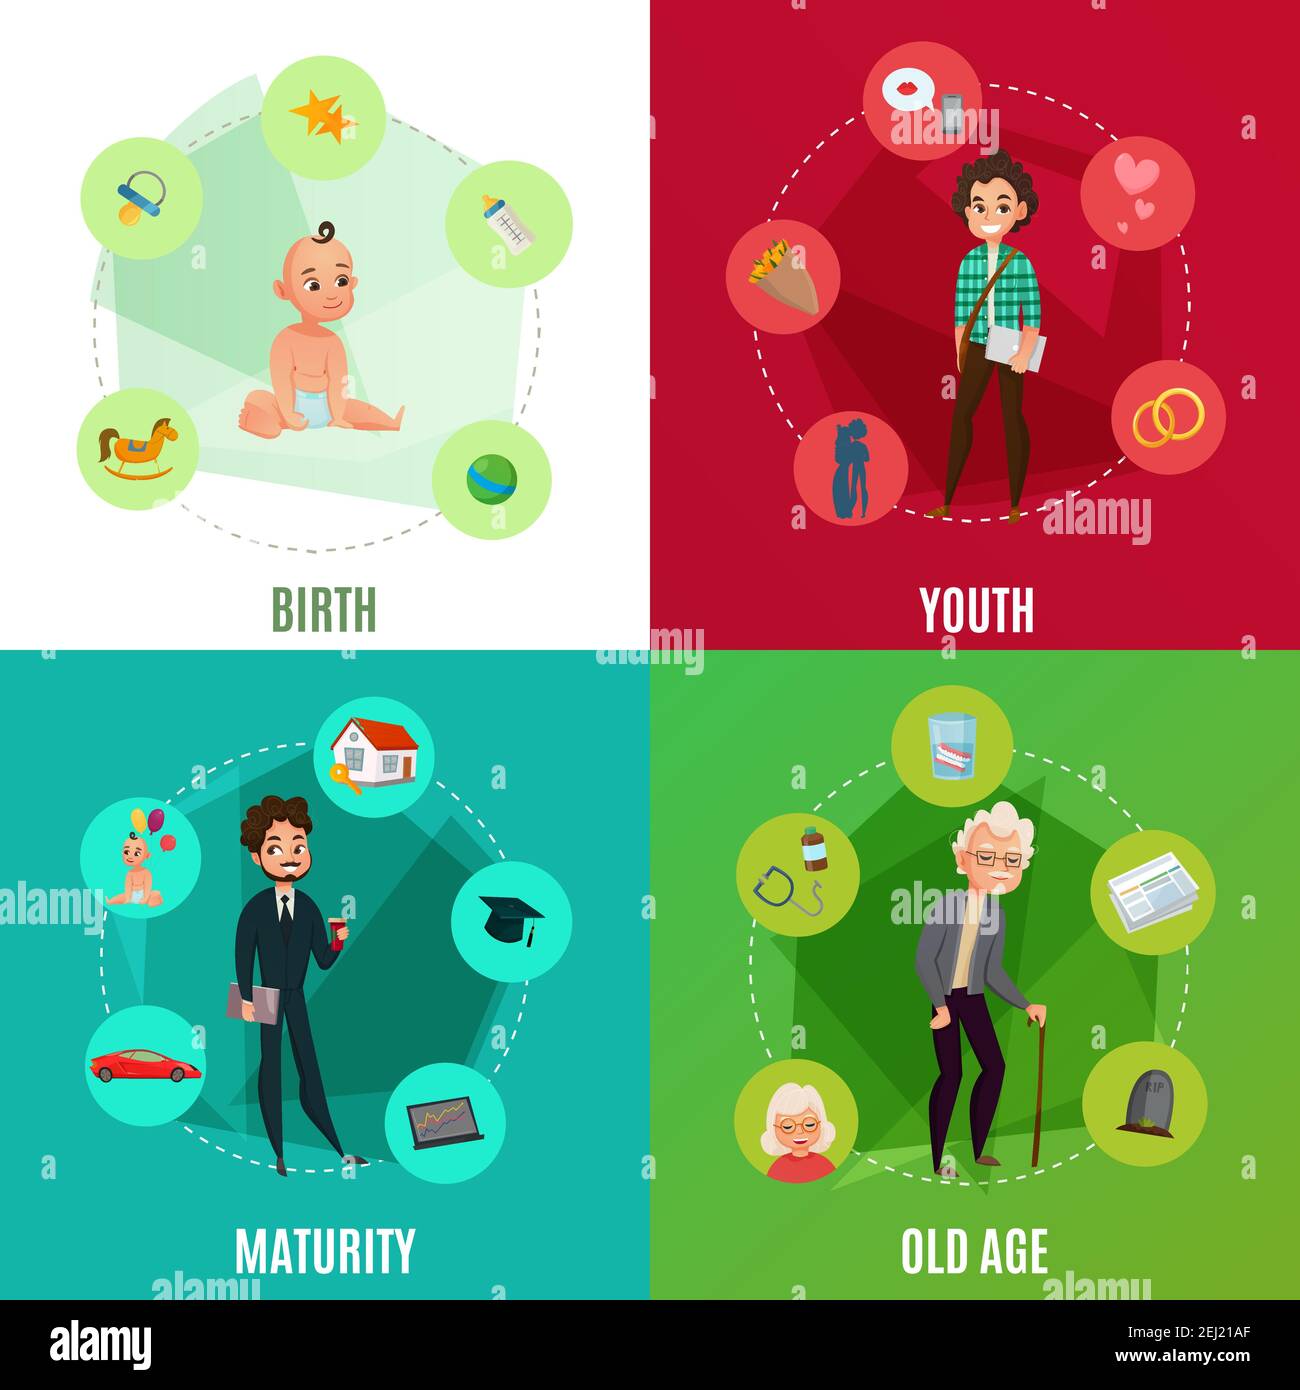 Human life cycle concept including birth, youth, maturity and old age on colorful background isolated vector illustration Stock Vector